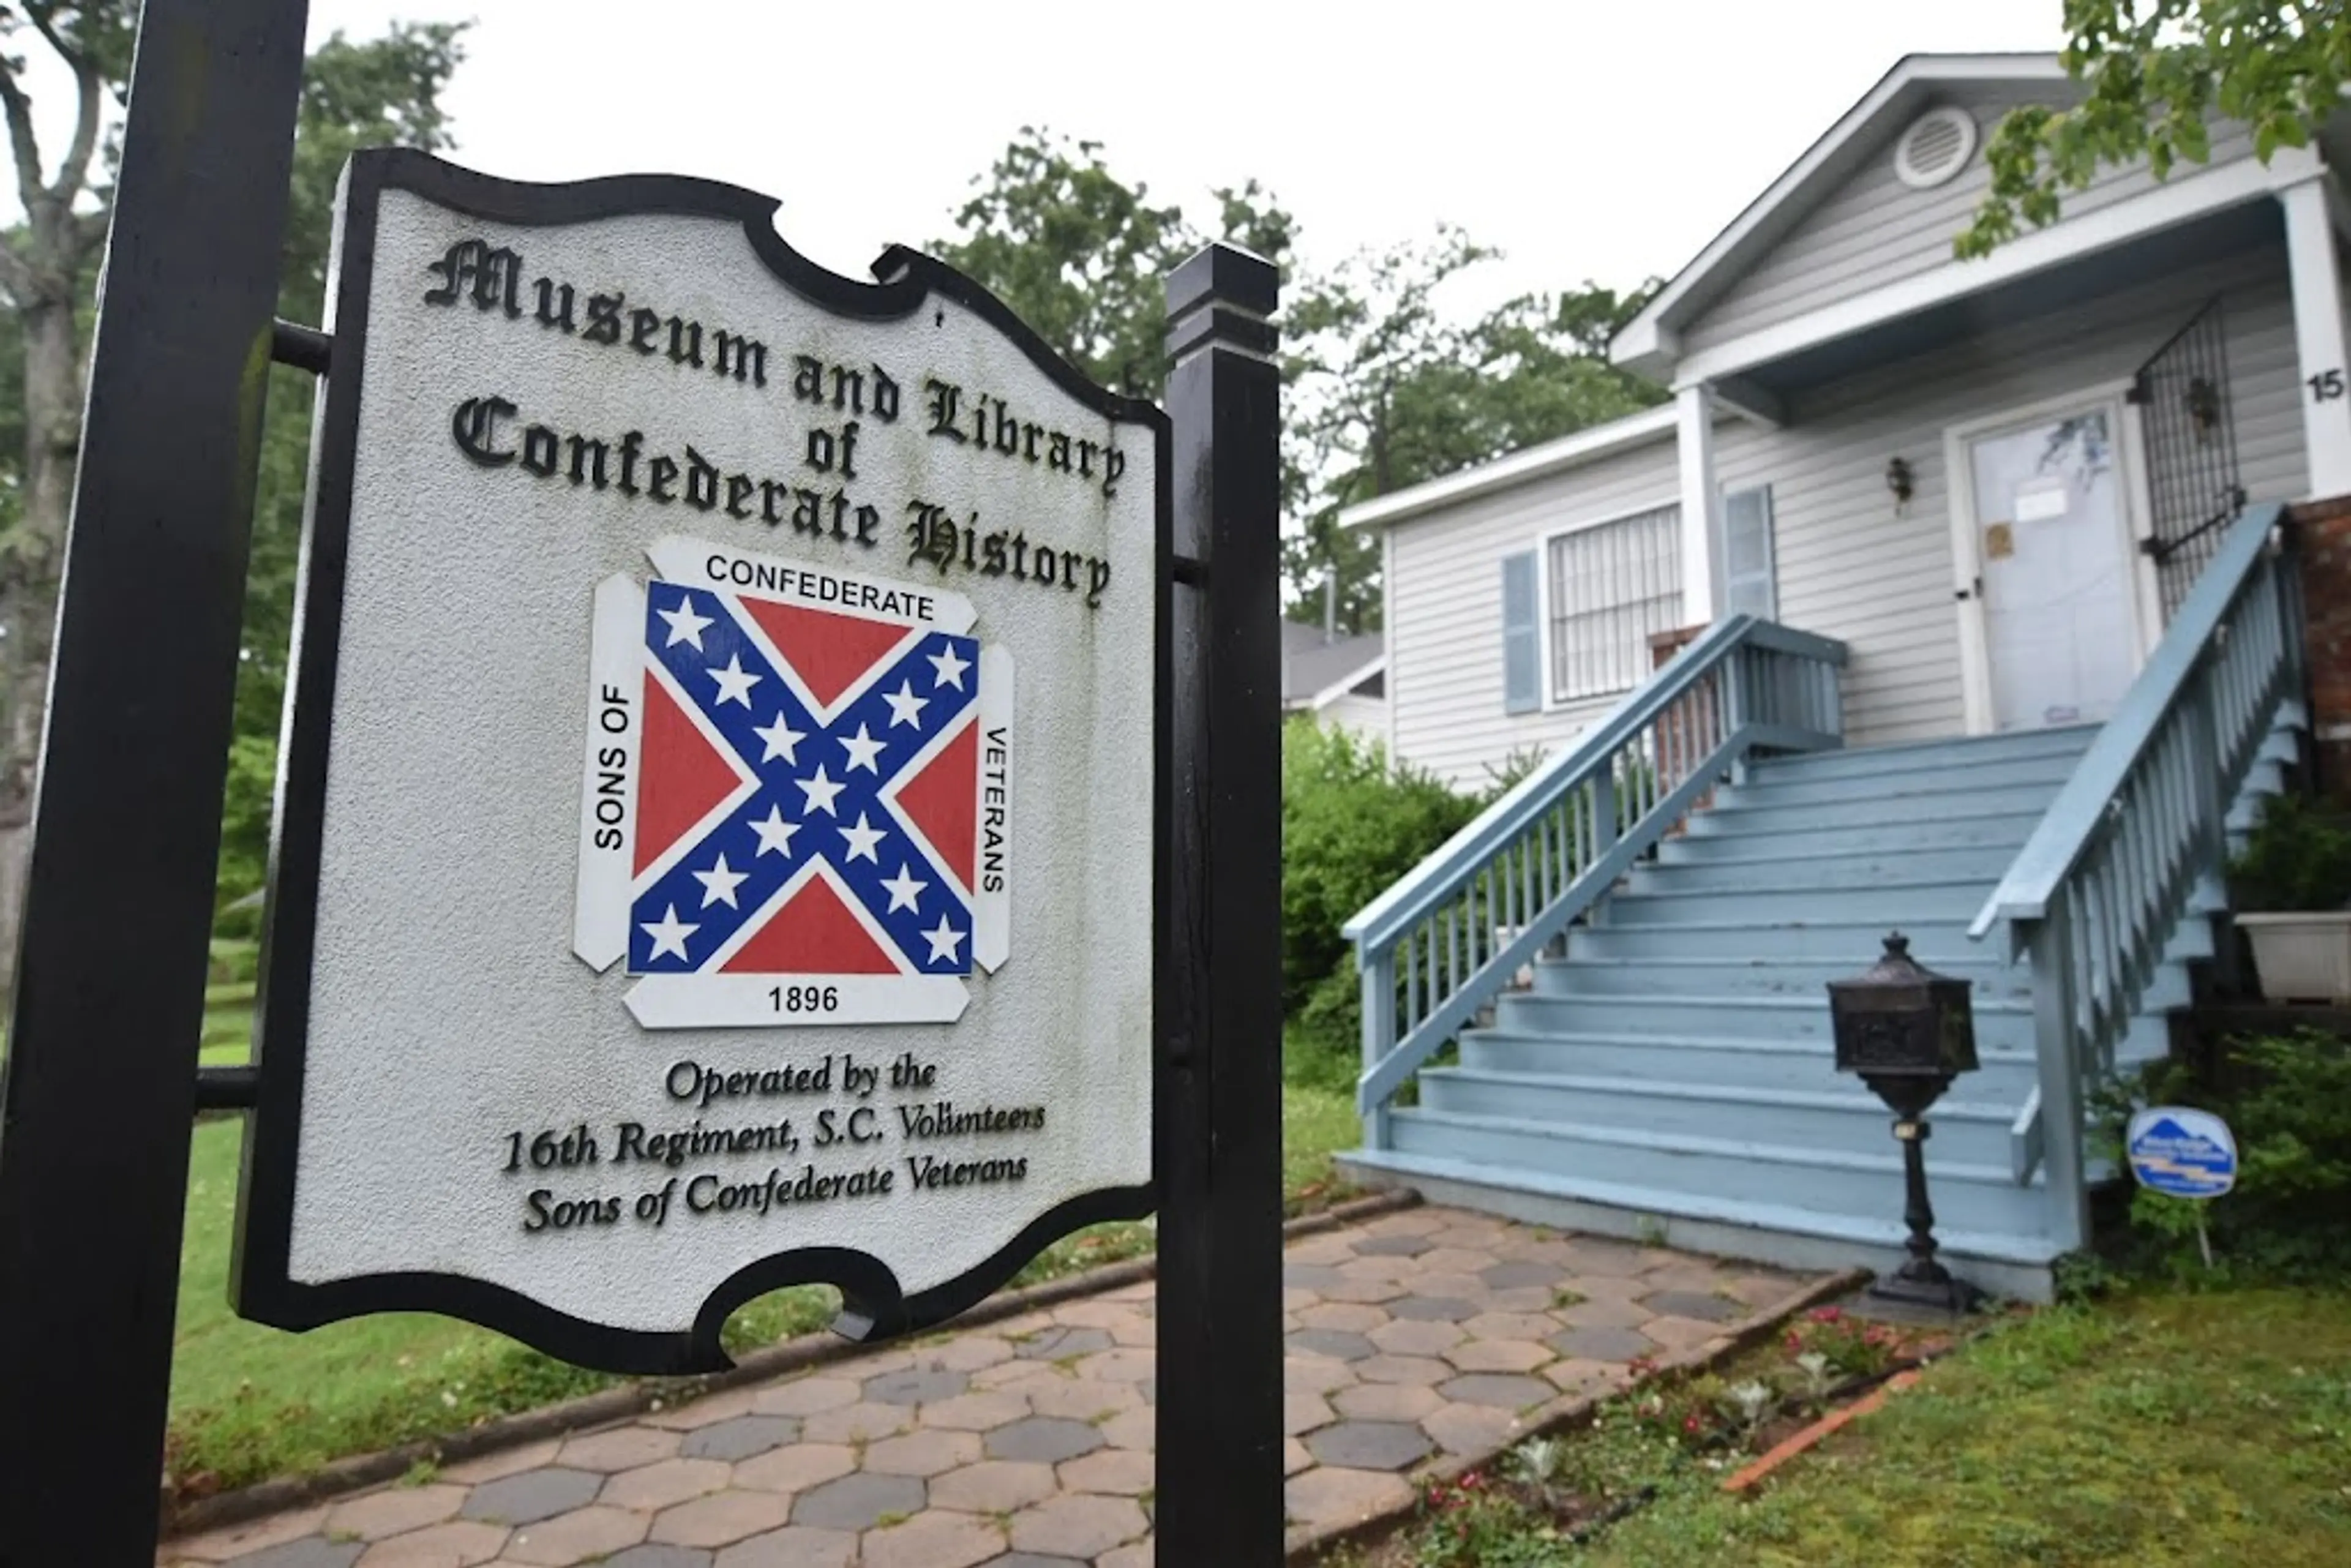 Museum and Library of Confederate History